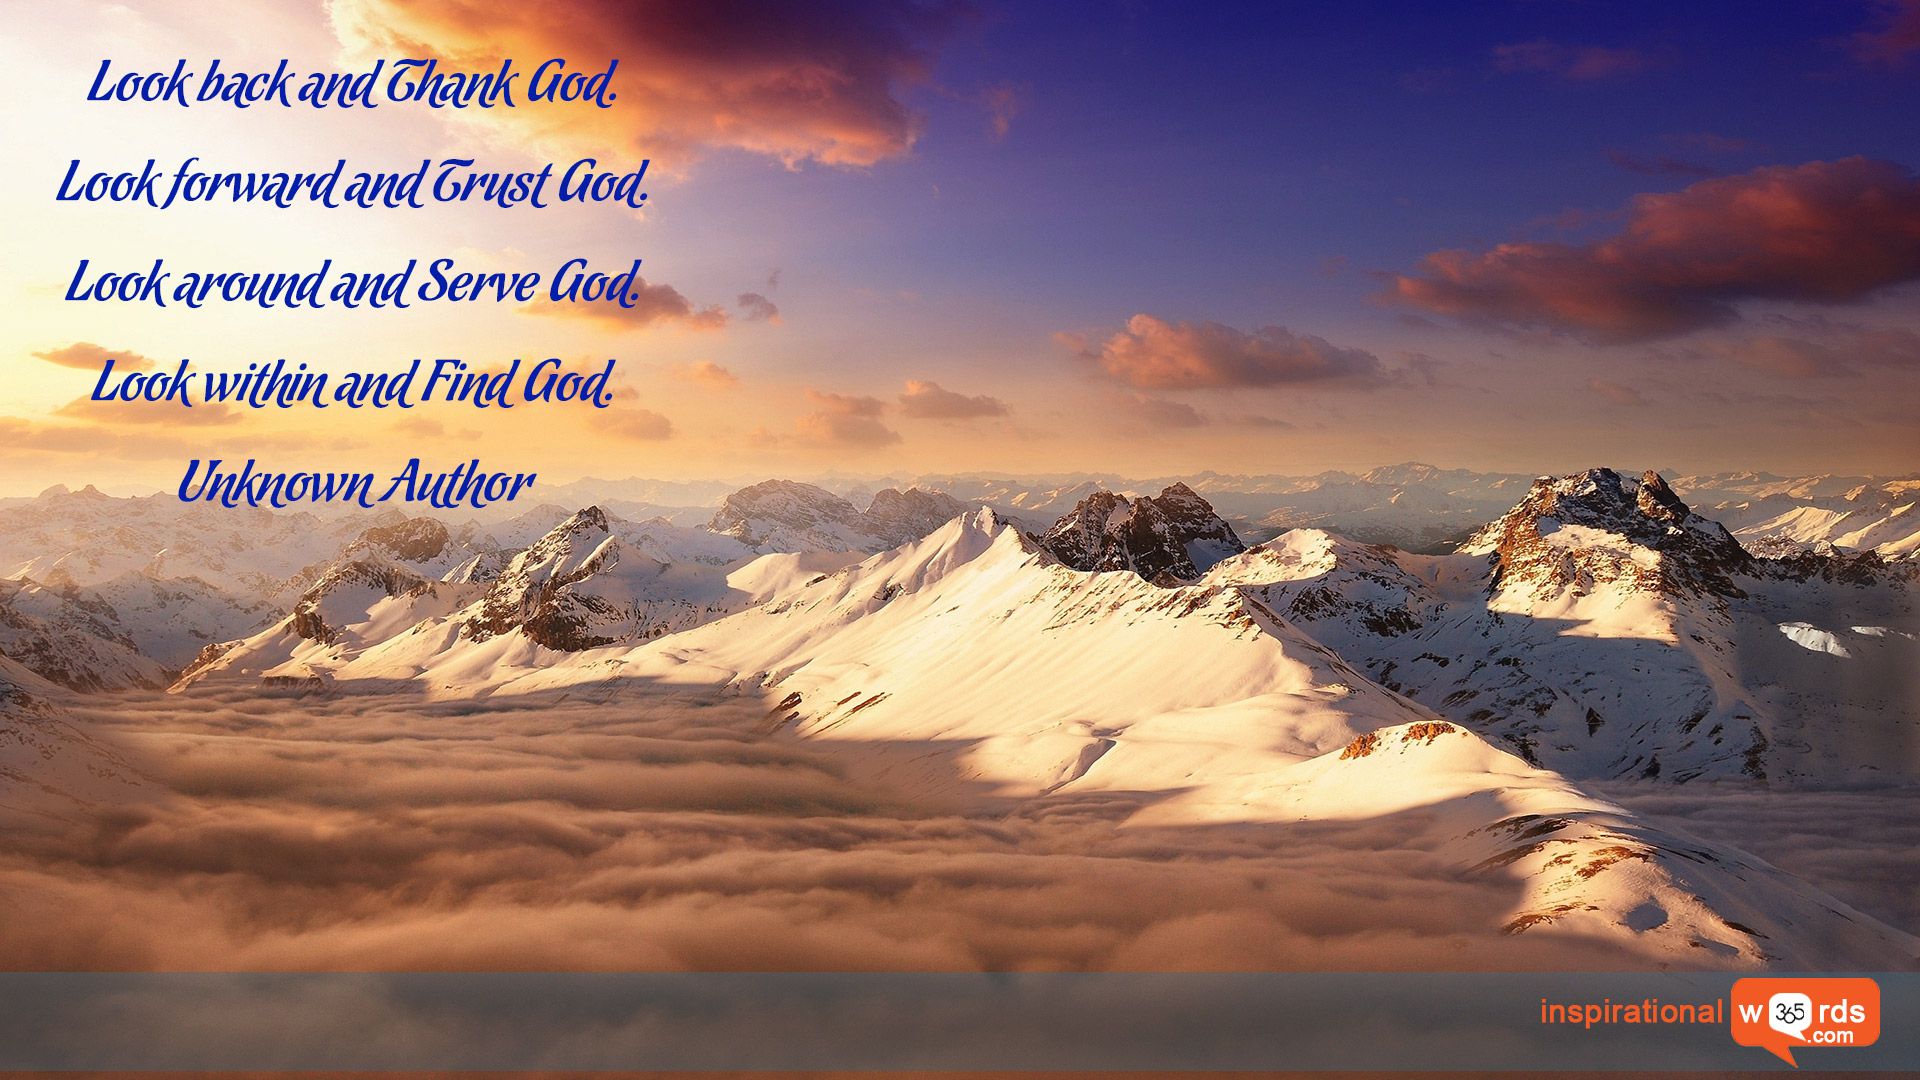 Inspirational Wallpaper Quote. Unknown Author “Look back and Thank God. Look forward and Trust God. Look. Inspirational wallpaper, Wallpaper quotes, Inspiration